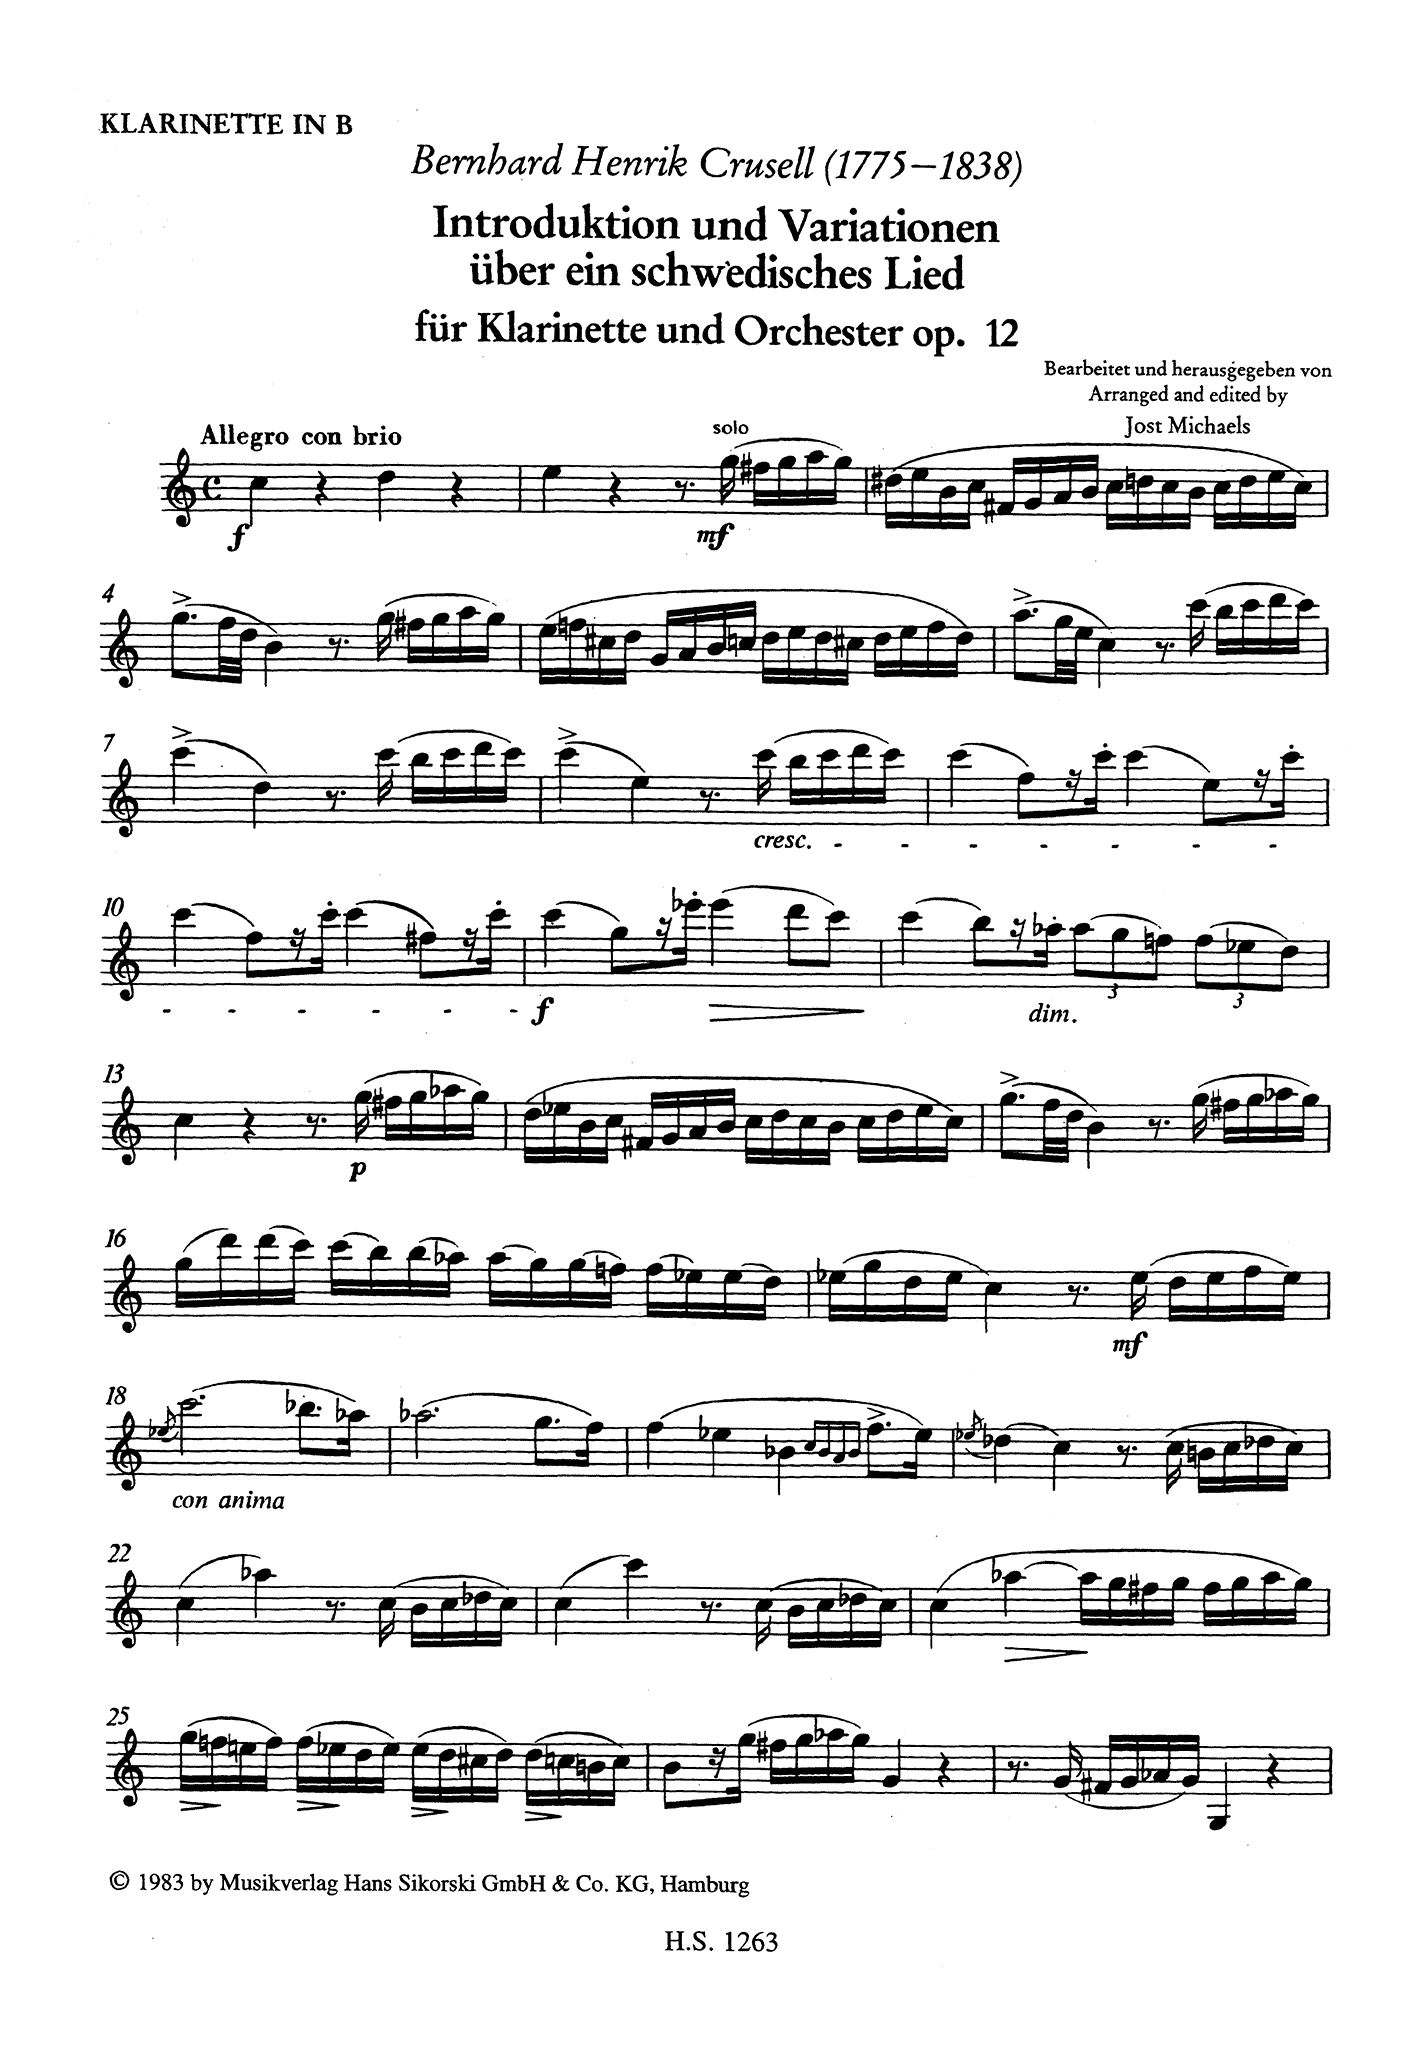 Crusell Introduction et Air suedois, Op. 12 Clarinet part